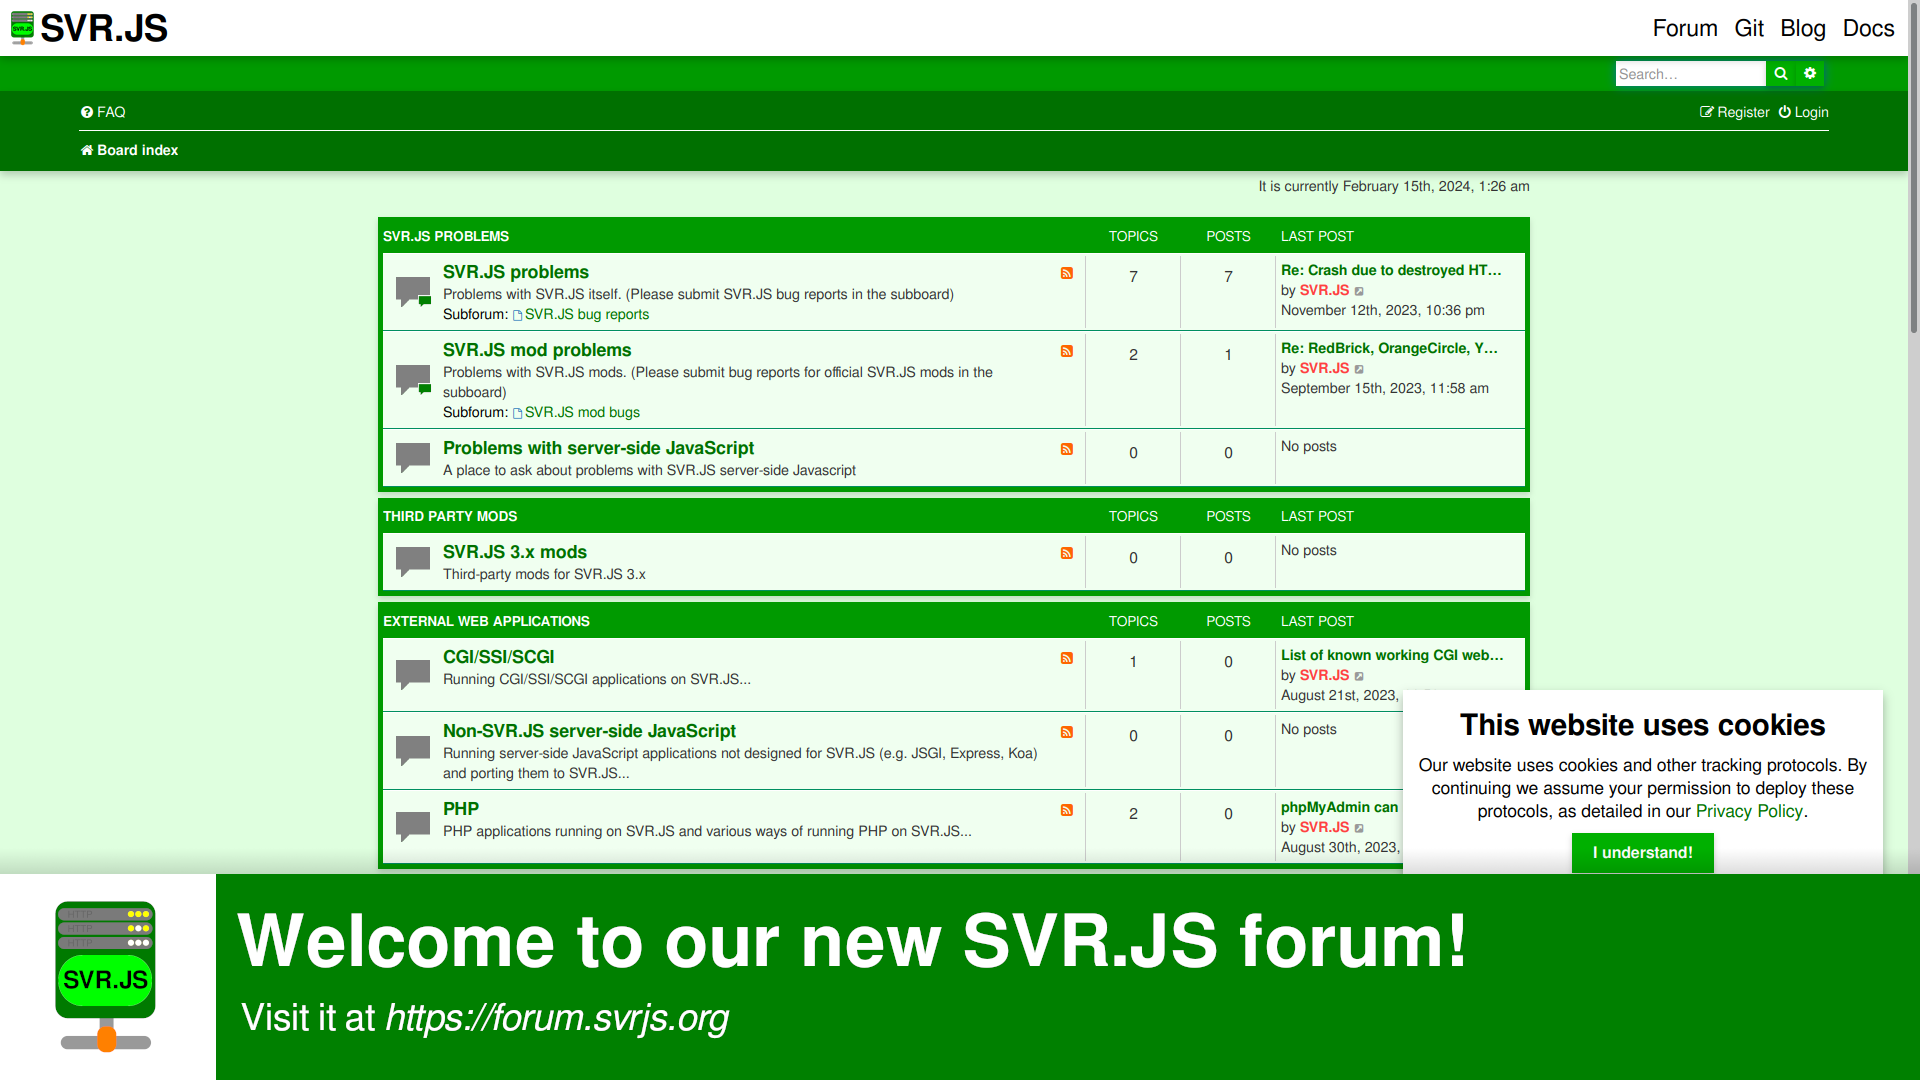 Welcome to our new SVR.JS forum!